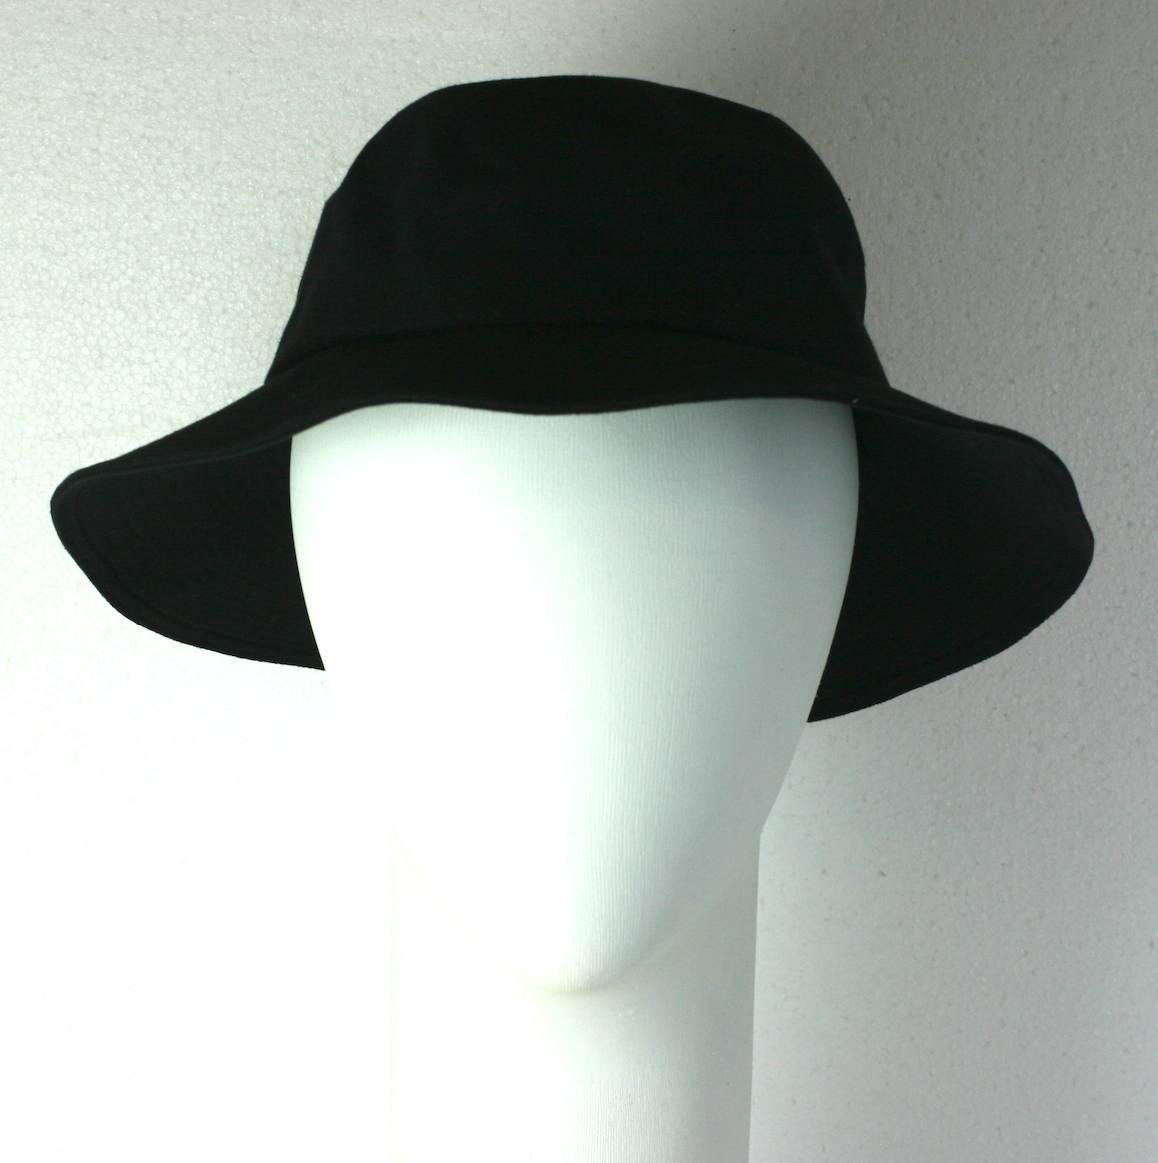 Yves Saint Laurent black cotton twill Fisherman's Hat with topstitched detailing throughout brim. A Gallic interpretation where the brim is slightly wider in back as the original style would be.
Alber Elbaz for YSL. 2000's France. 
Excellent